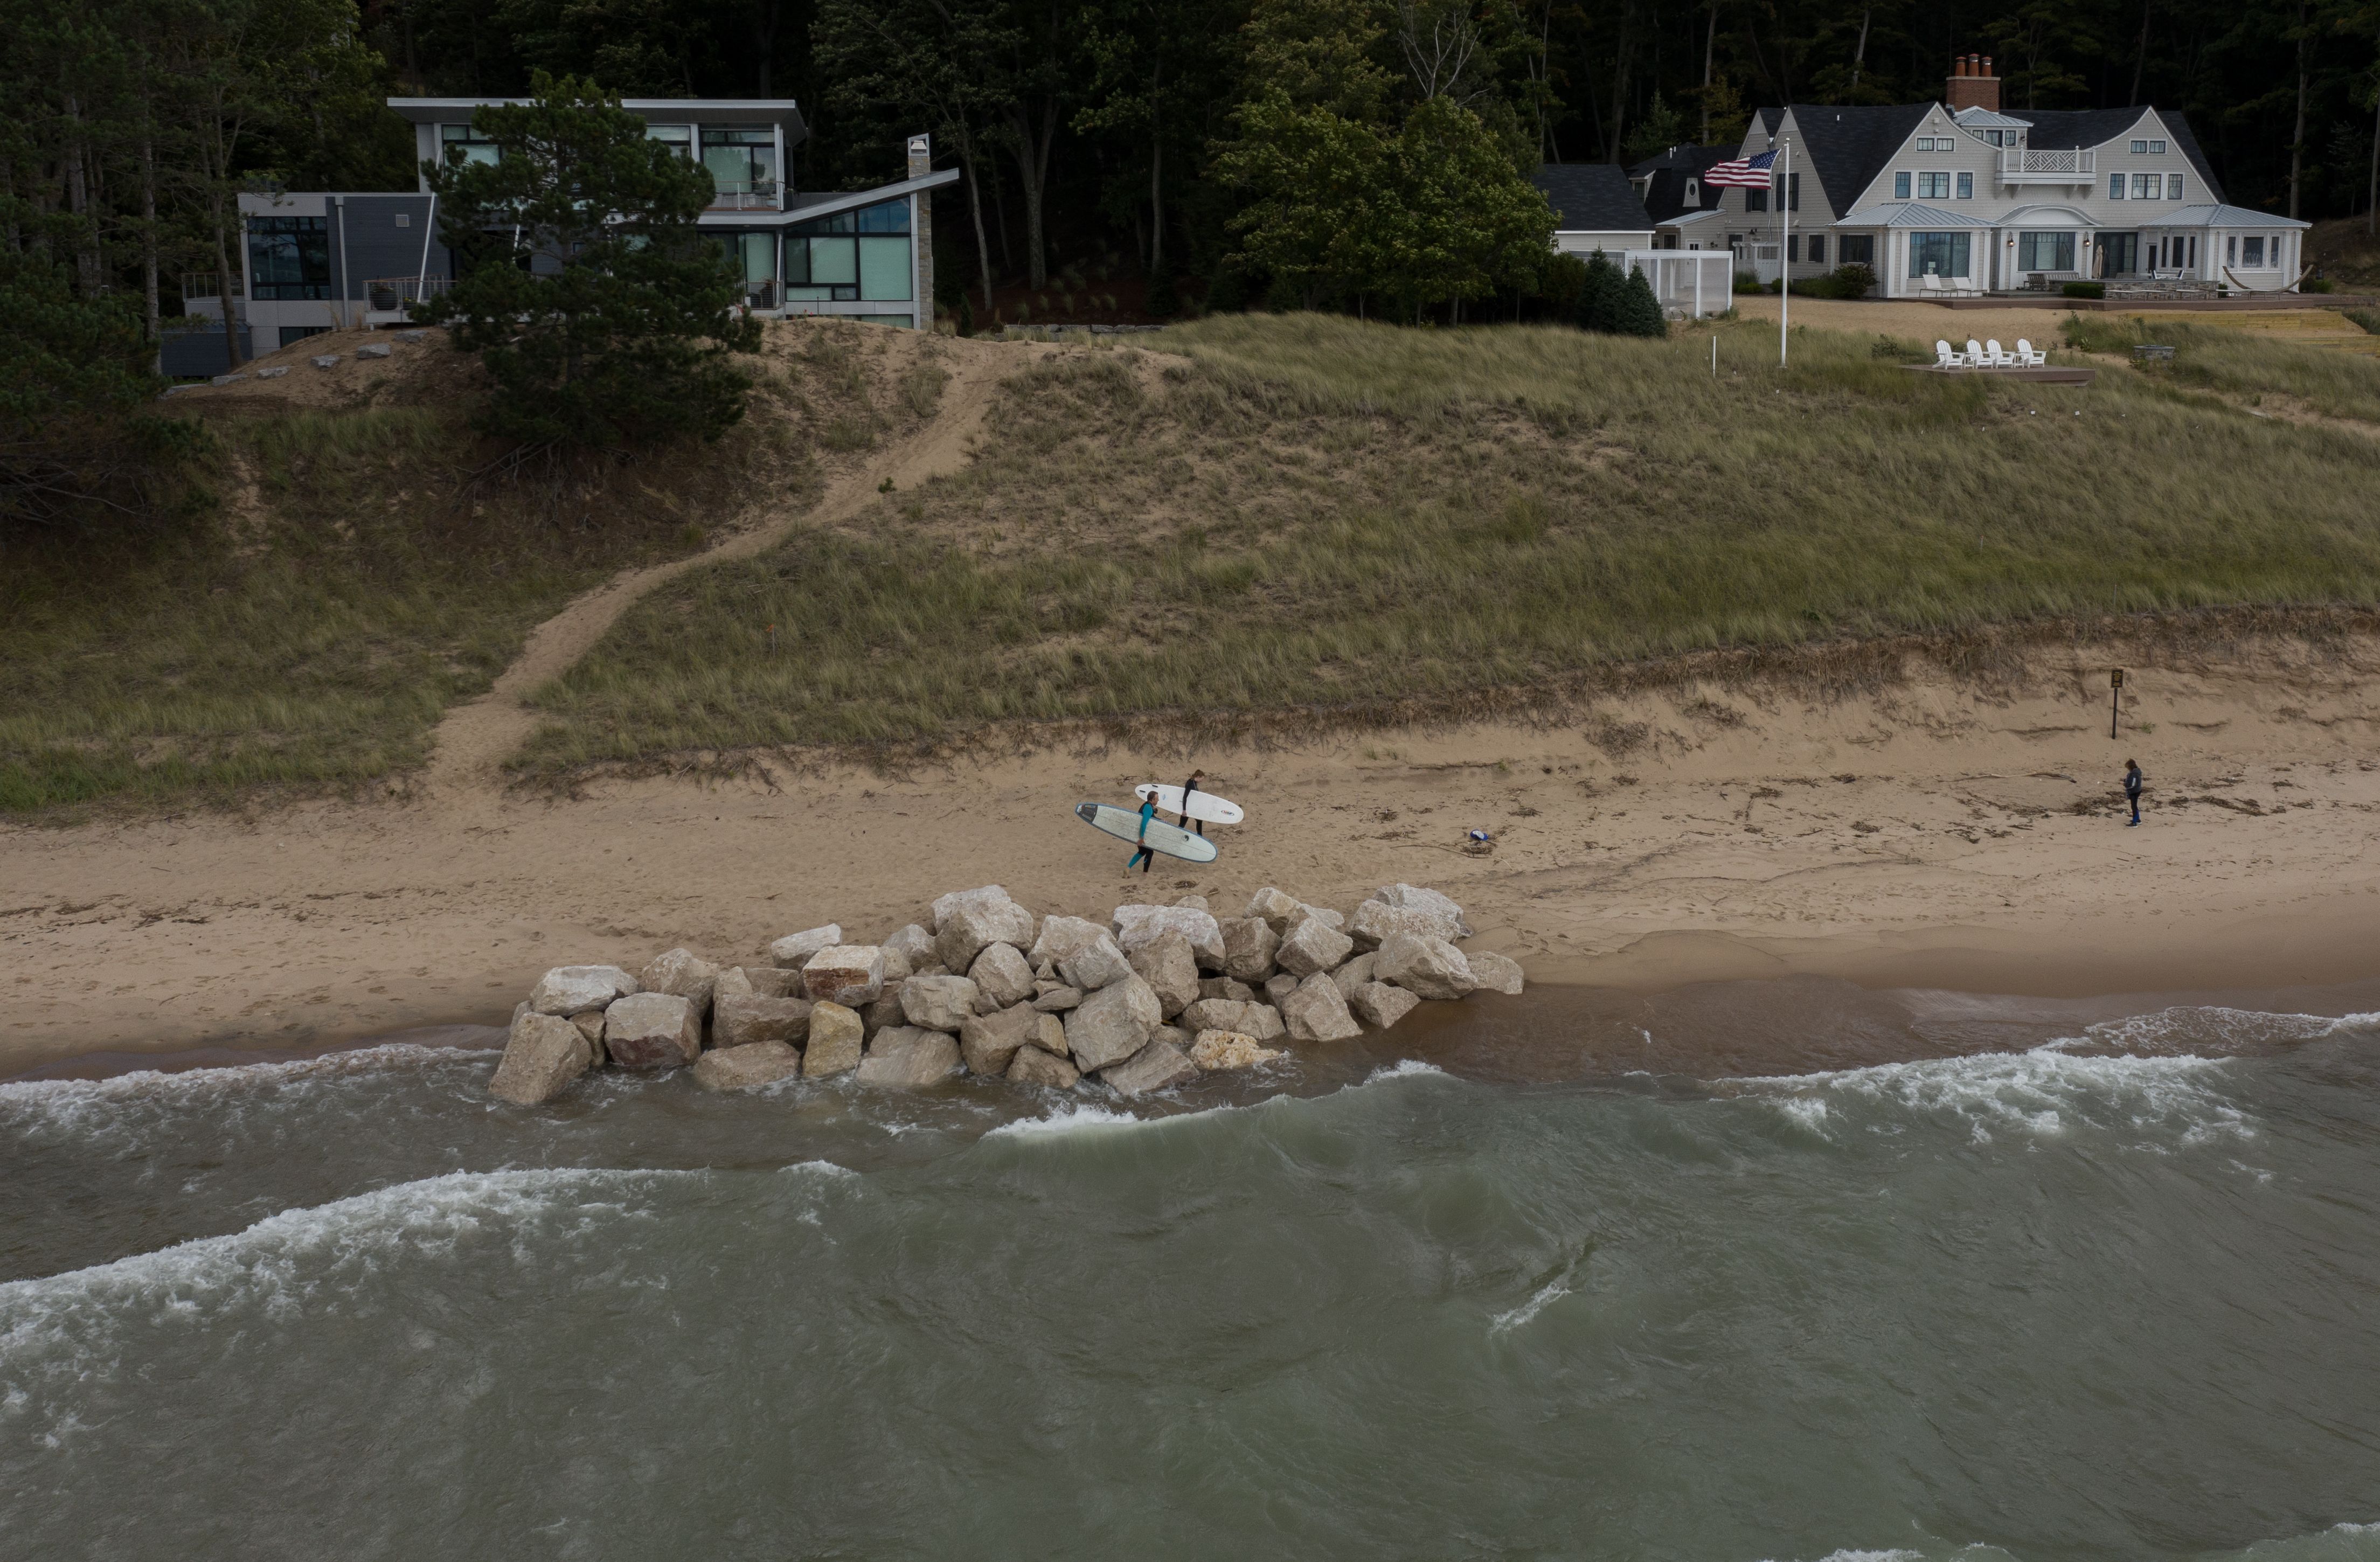 Surfers Michael Christensen, left, and daughter Julia walk near a pile of boulders used for construction of a seawall in front of a new house near Oval Beach in Saugatuck, Michigan, on Sept. 29, 2020. Image by Zbigniew Bzdak/Chicago Tribune. United States, 2020.